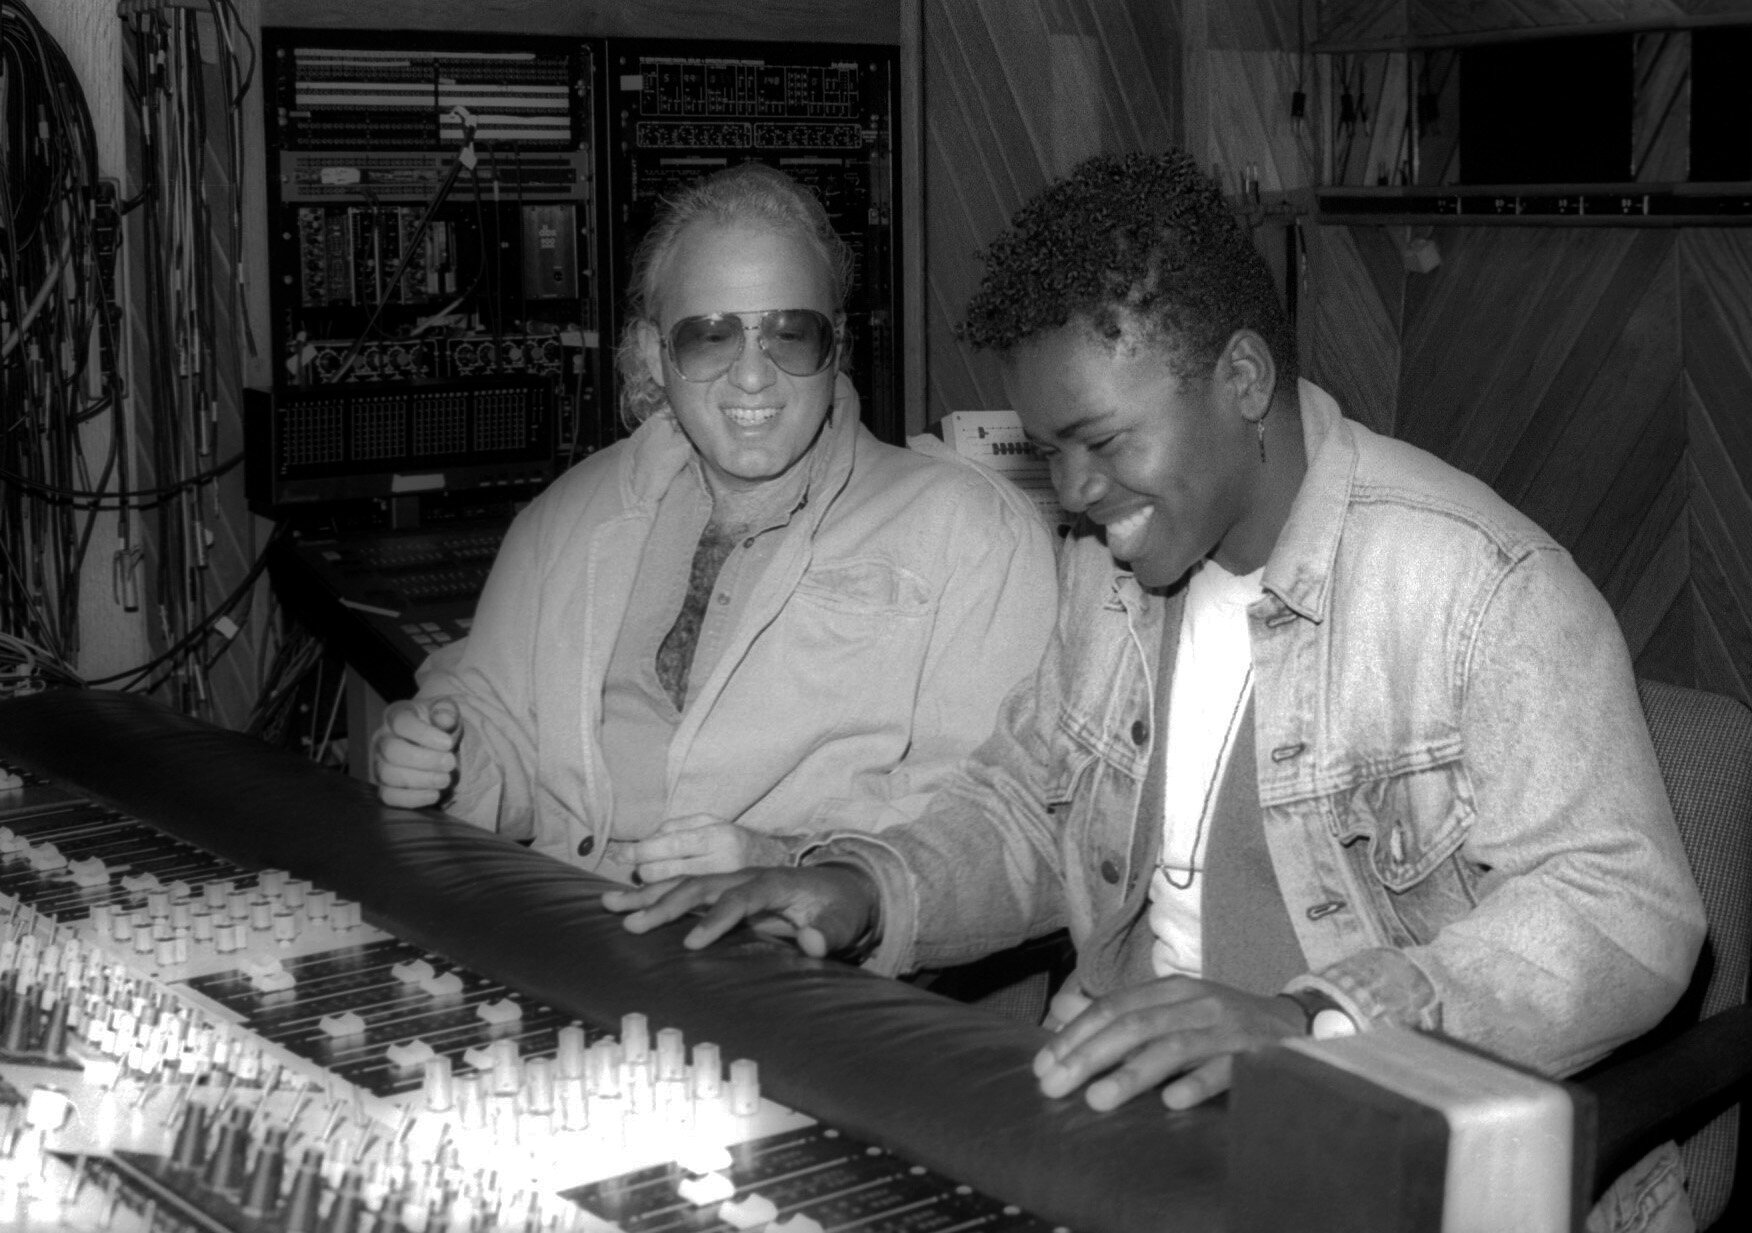 David Kershenbaum, wearing an open shirt and sunglasses, sits next to Tracy Chapman, wearing a jean jacket, in front of a control board in a recording studio.